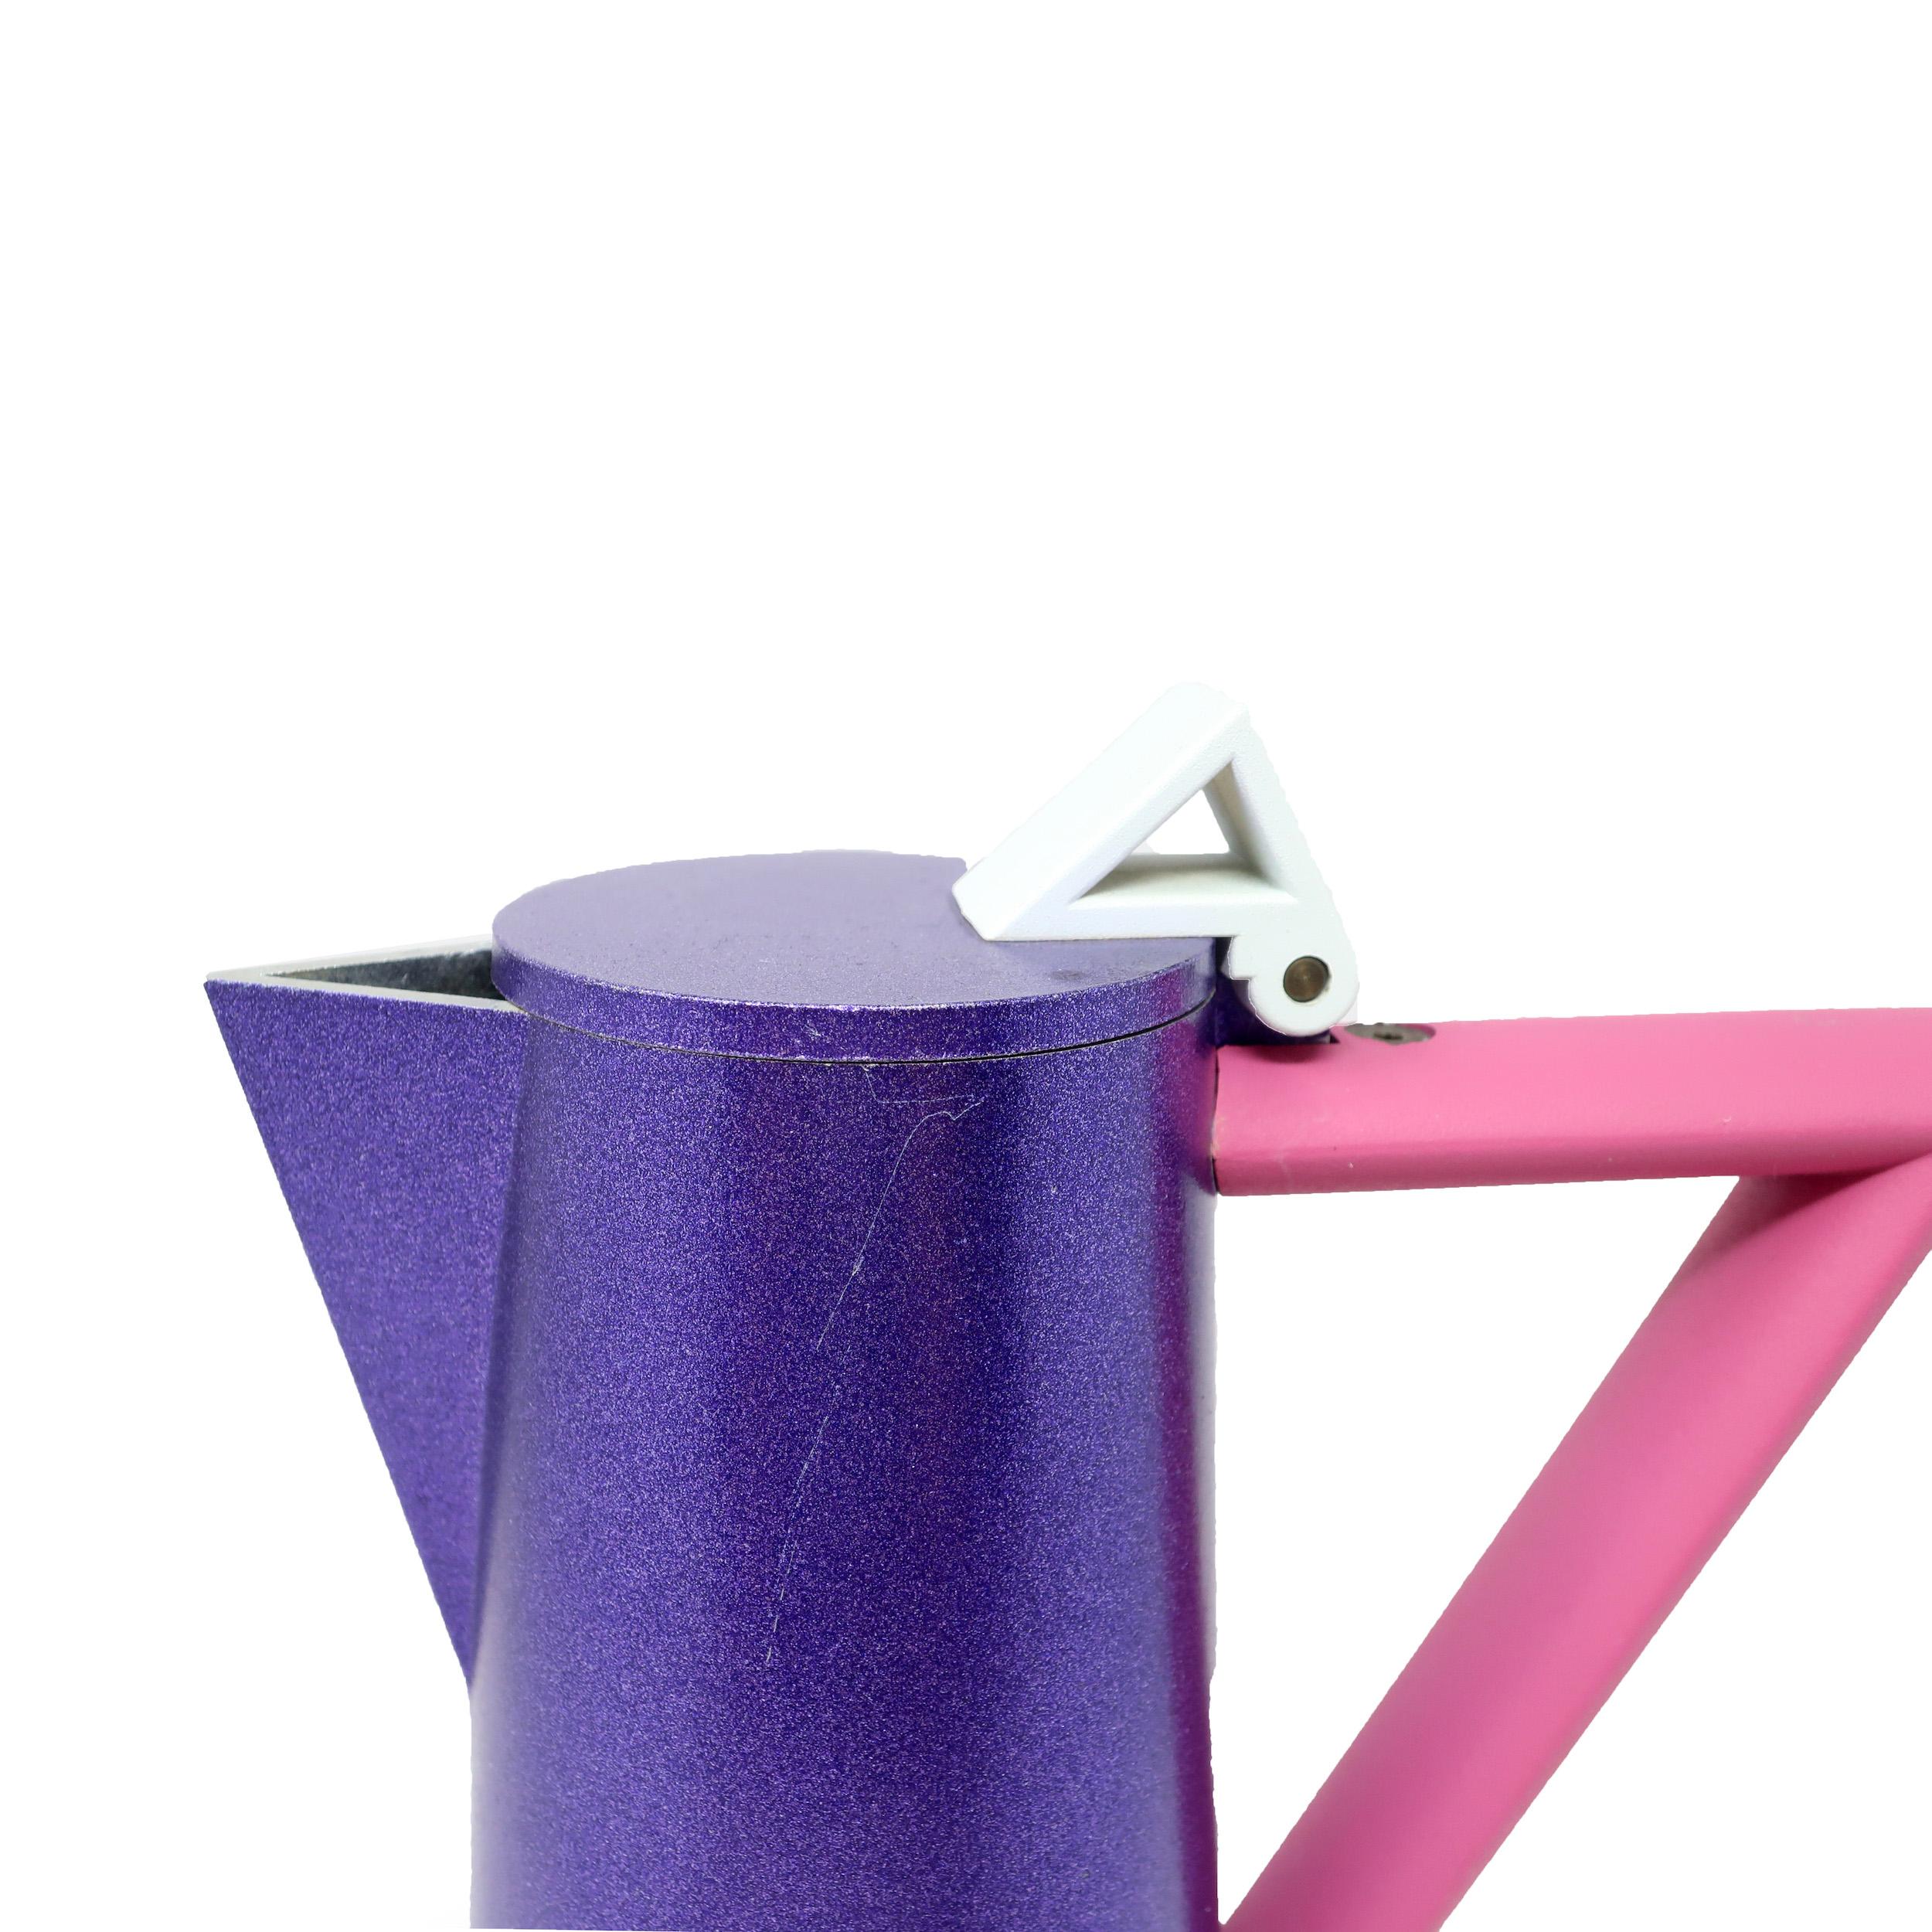 Post-Modern Postmodern Pink and Purple Espresso Pot by Ettore Sottsass for Lagostina